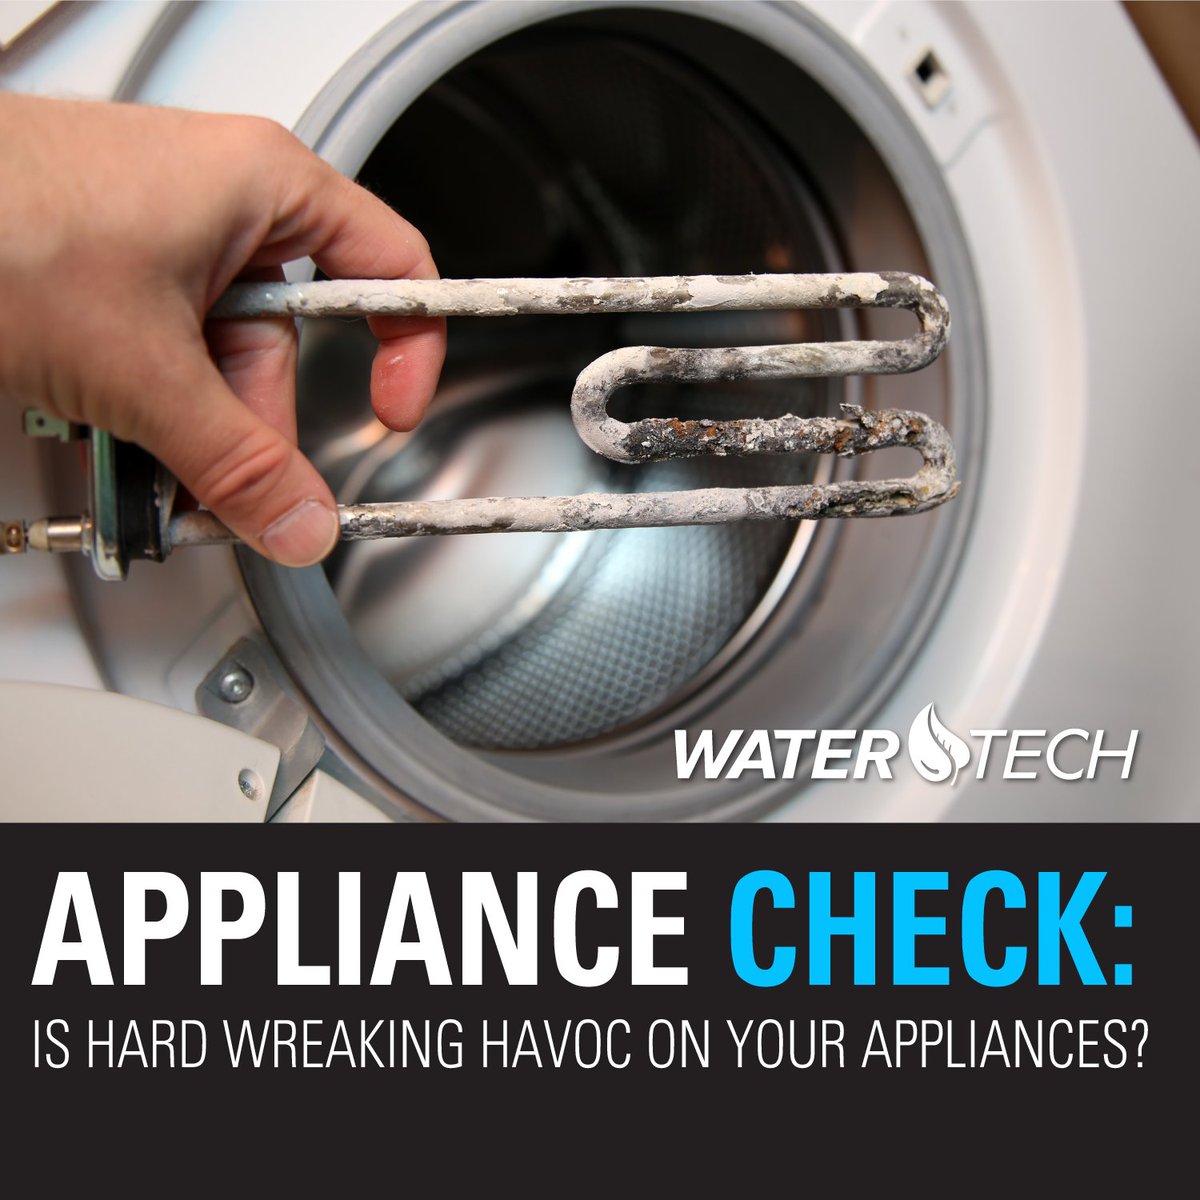 Appliance Check: Is hard water wreaking havoc on your appliances? Don't let mineral buildup sabotage your homes appliances! Hard water can reduce their efficiency and lifespan, leading to costly repairs. 
#ApplianceCare #FilteredForLongevity #HomeMaintenance #SayNoToHardWater